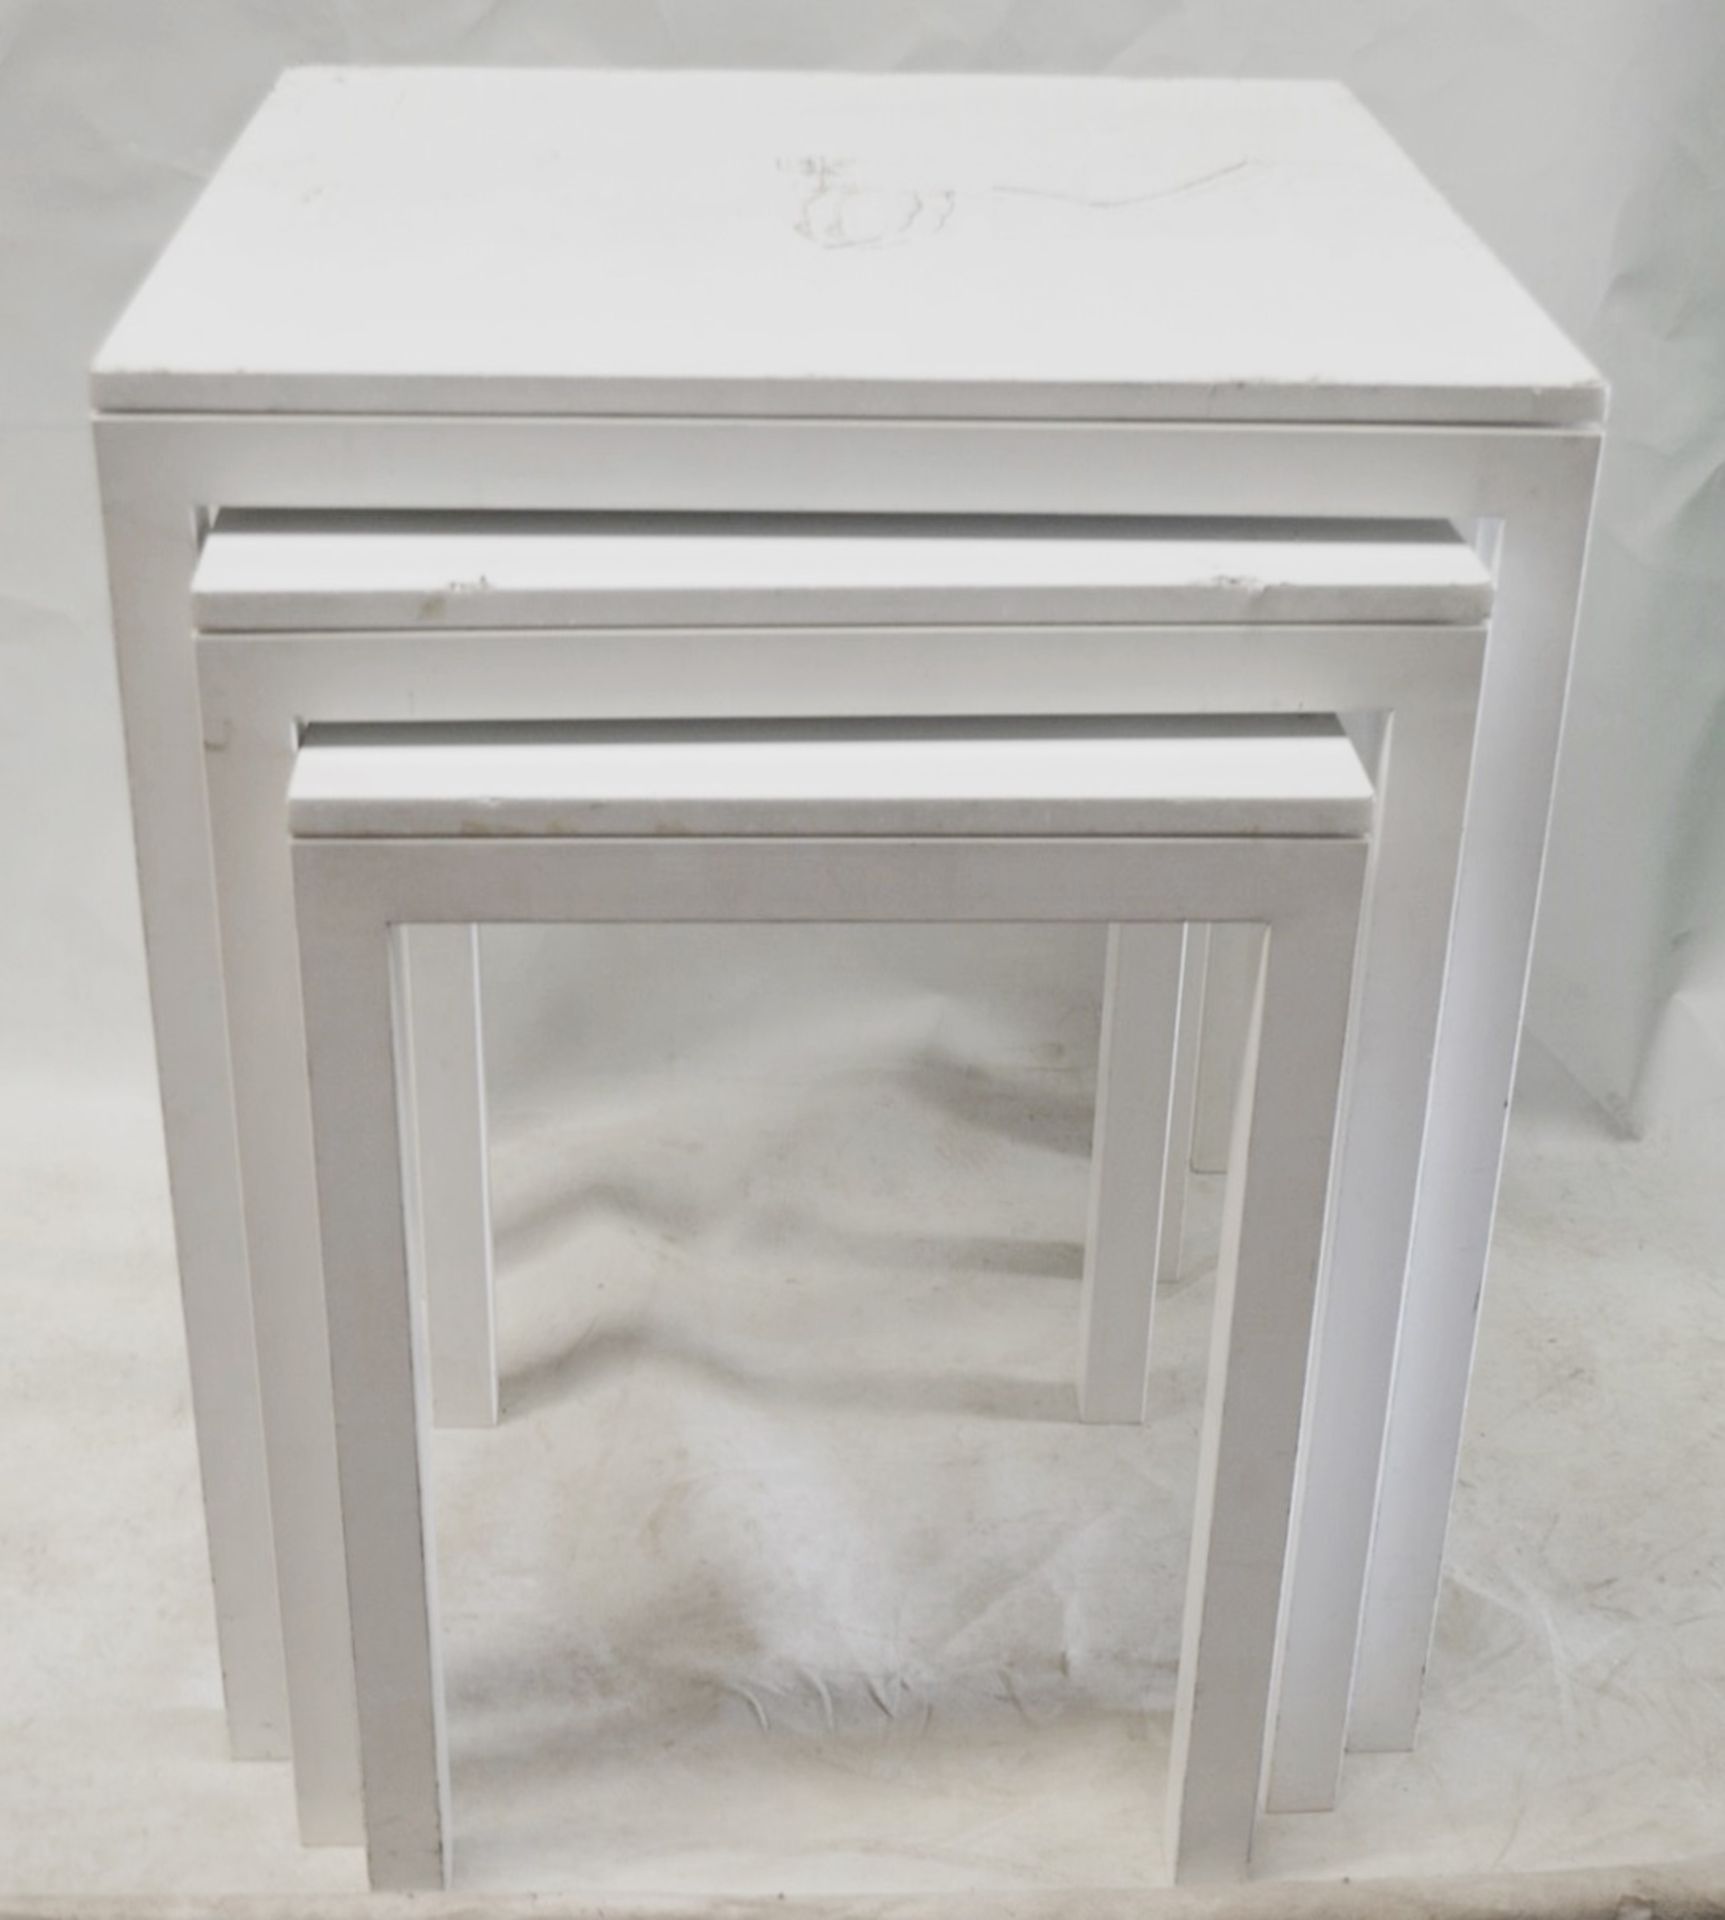 Set Of 3 x Stone Topped Retail Shop Display Metal Nesting Tables In White - Image 2 of 5